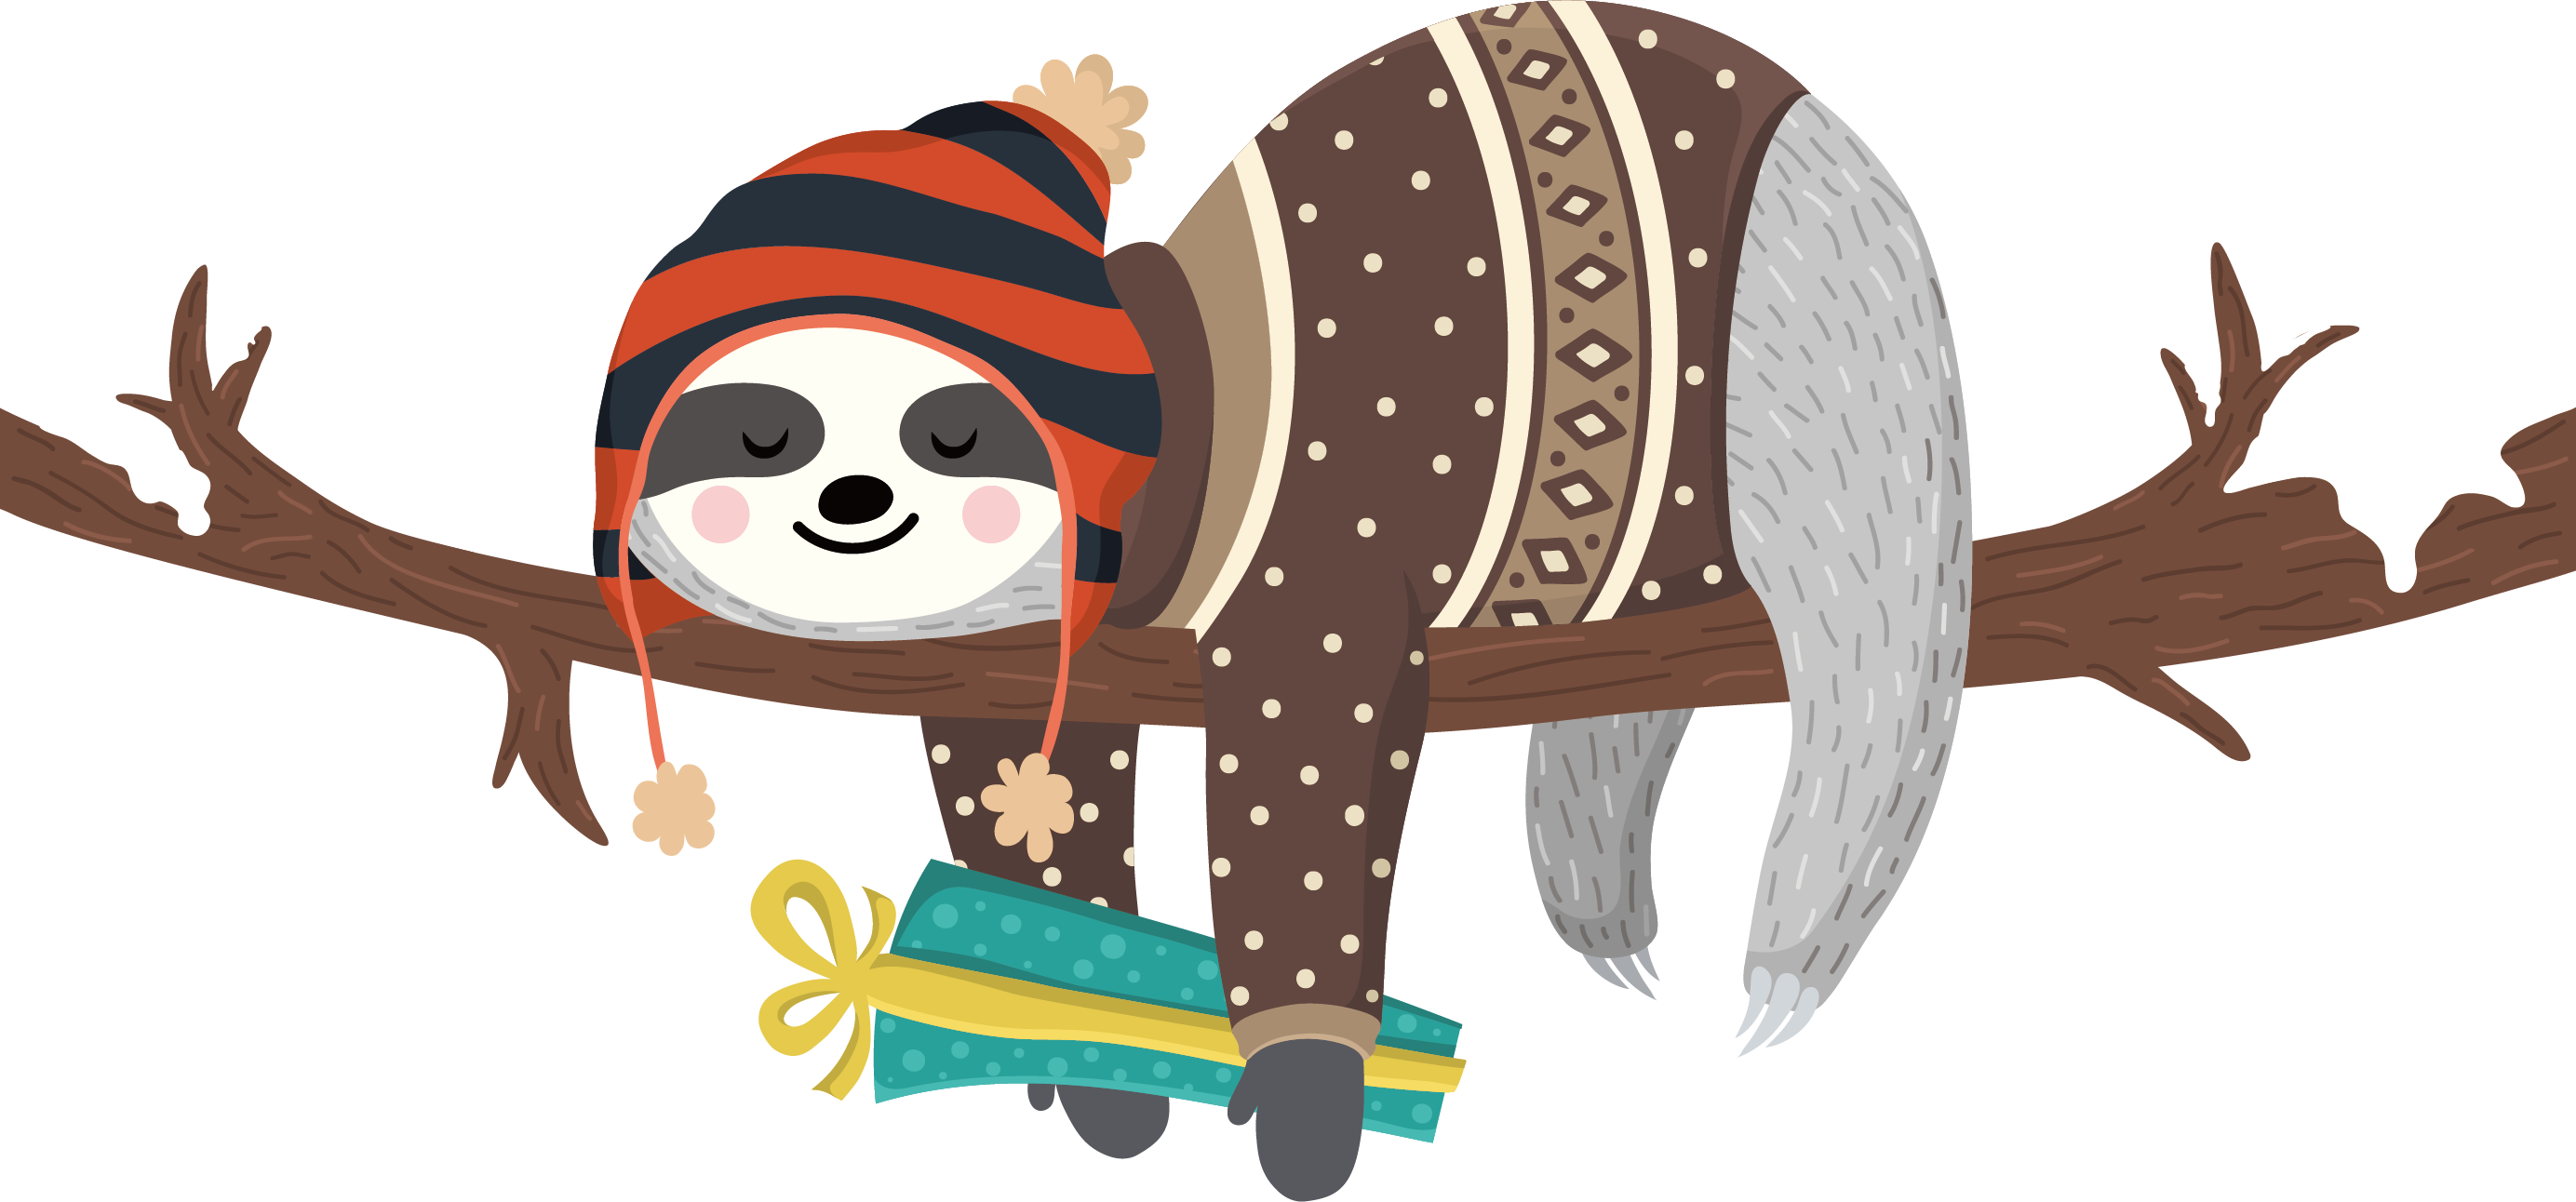 Sloth Illustration - Wake Me Up When Winter Is Over (2768x1292), Png Downlo...